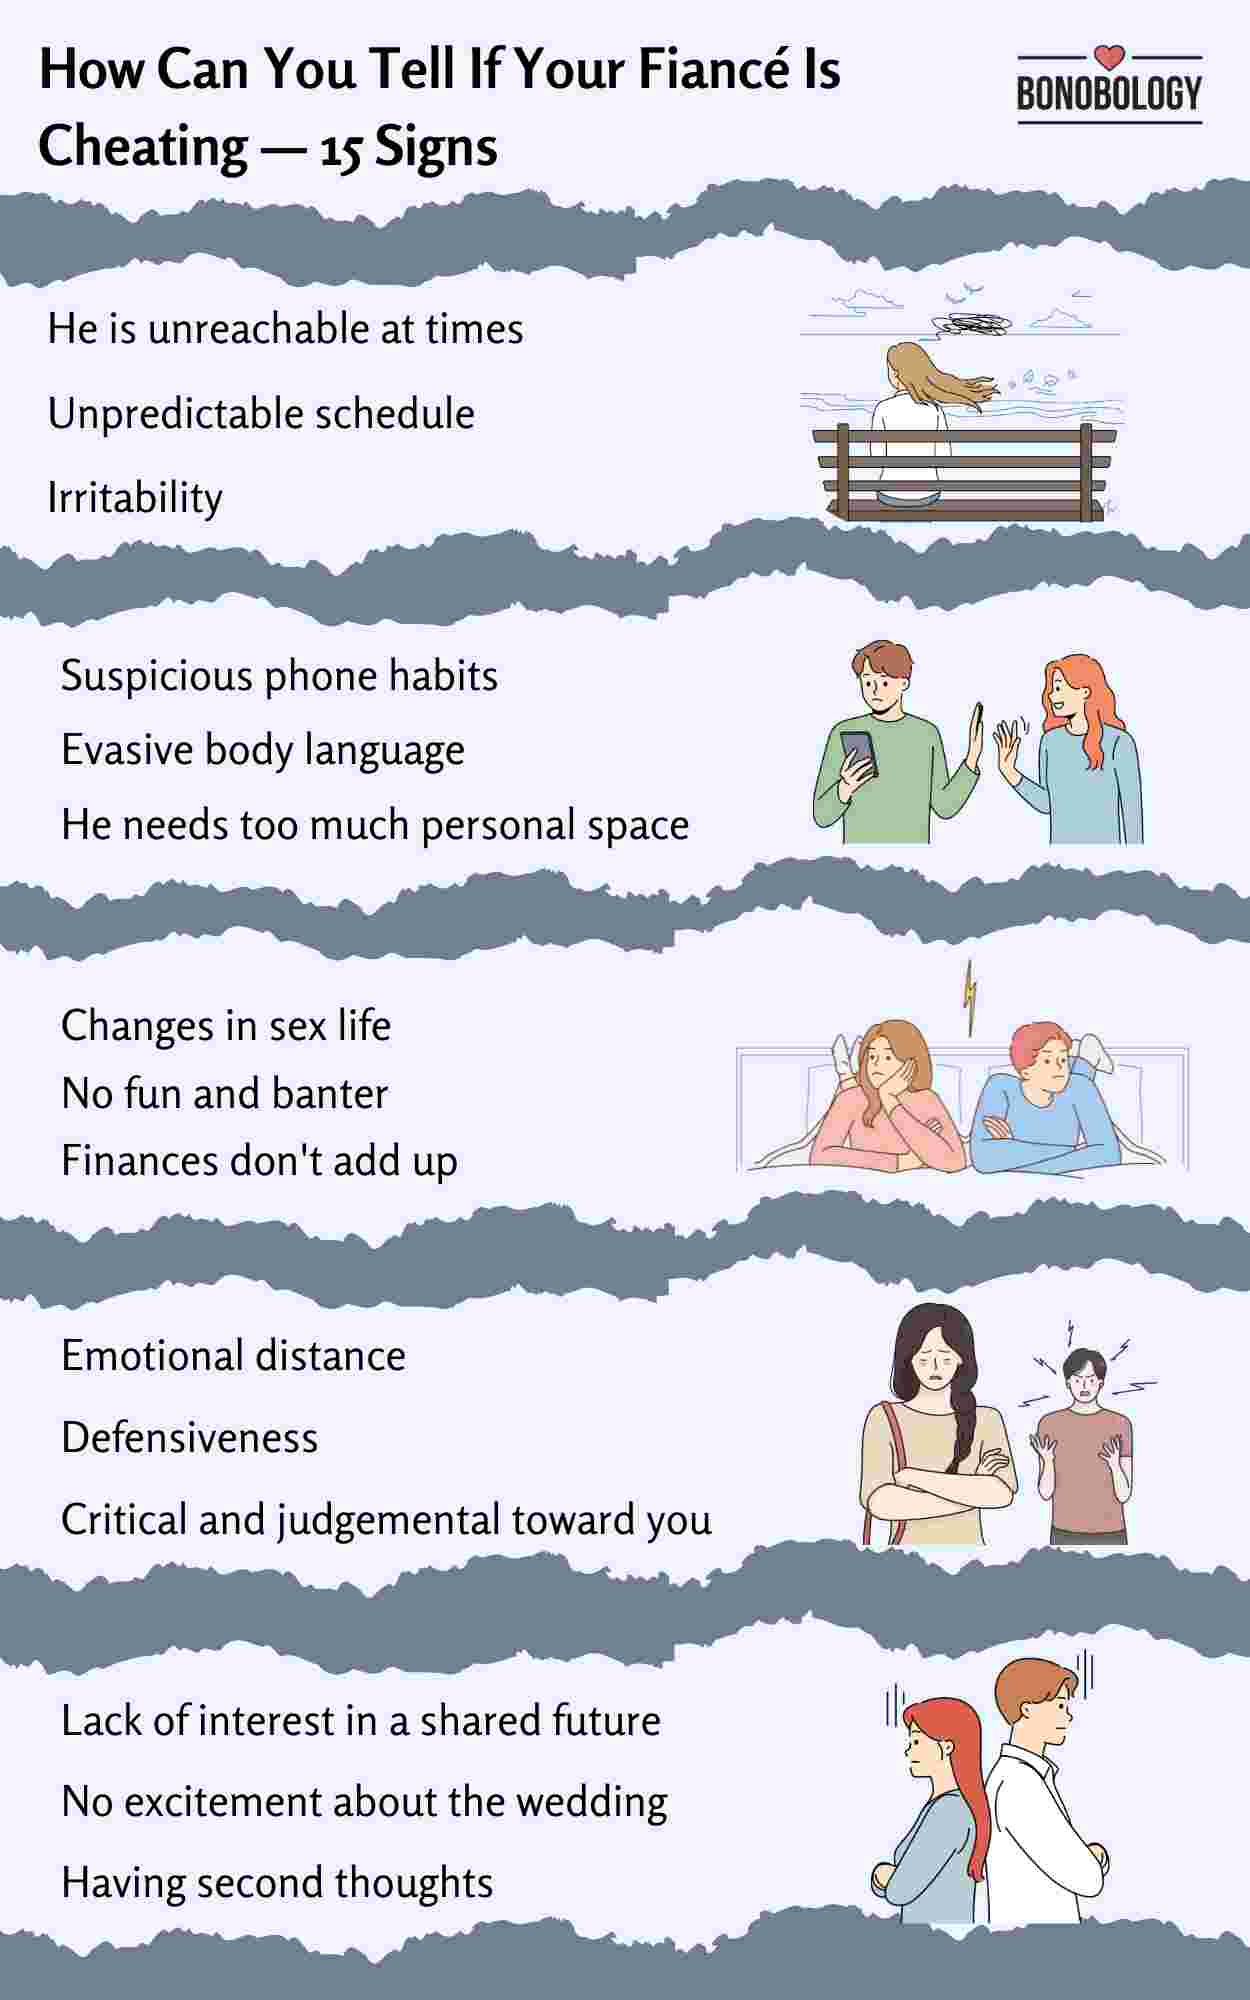 Infographic on How Can You Tell If Your Fiancé Is Cheating